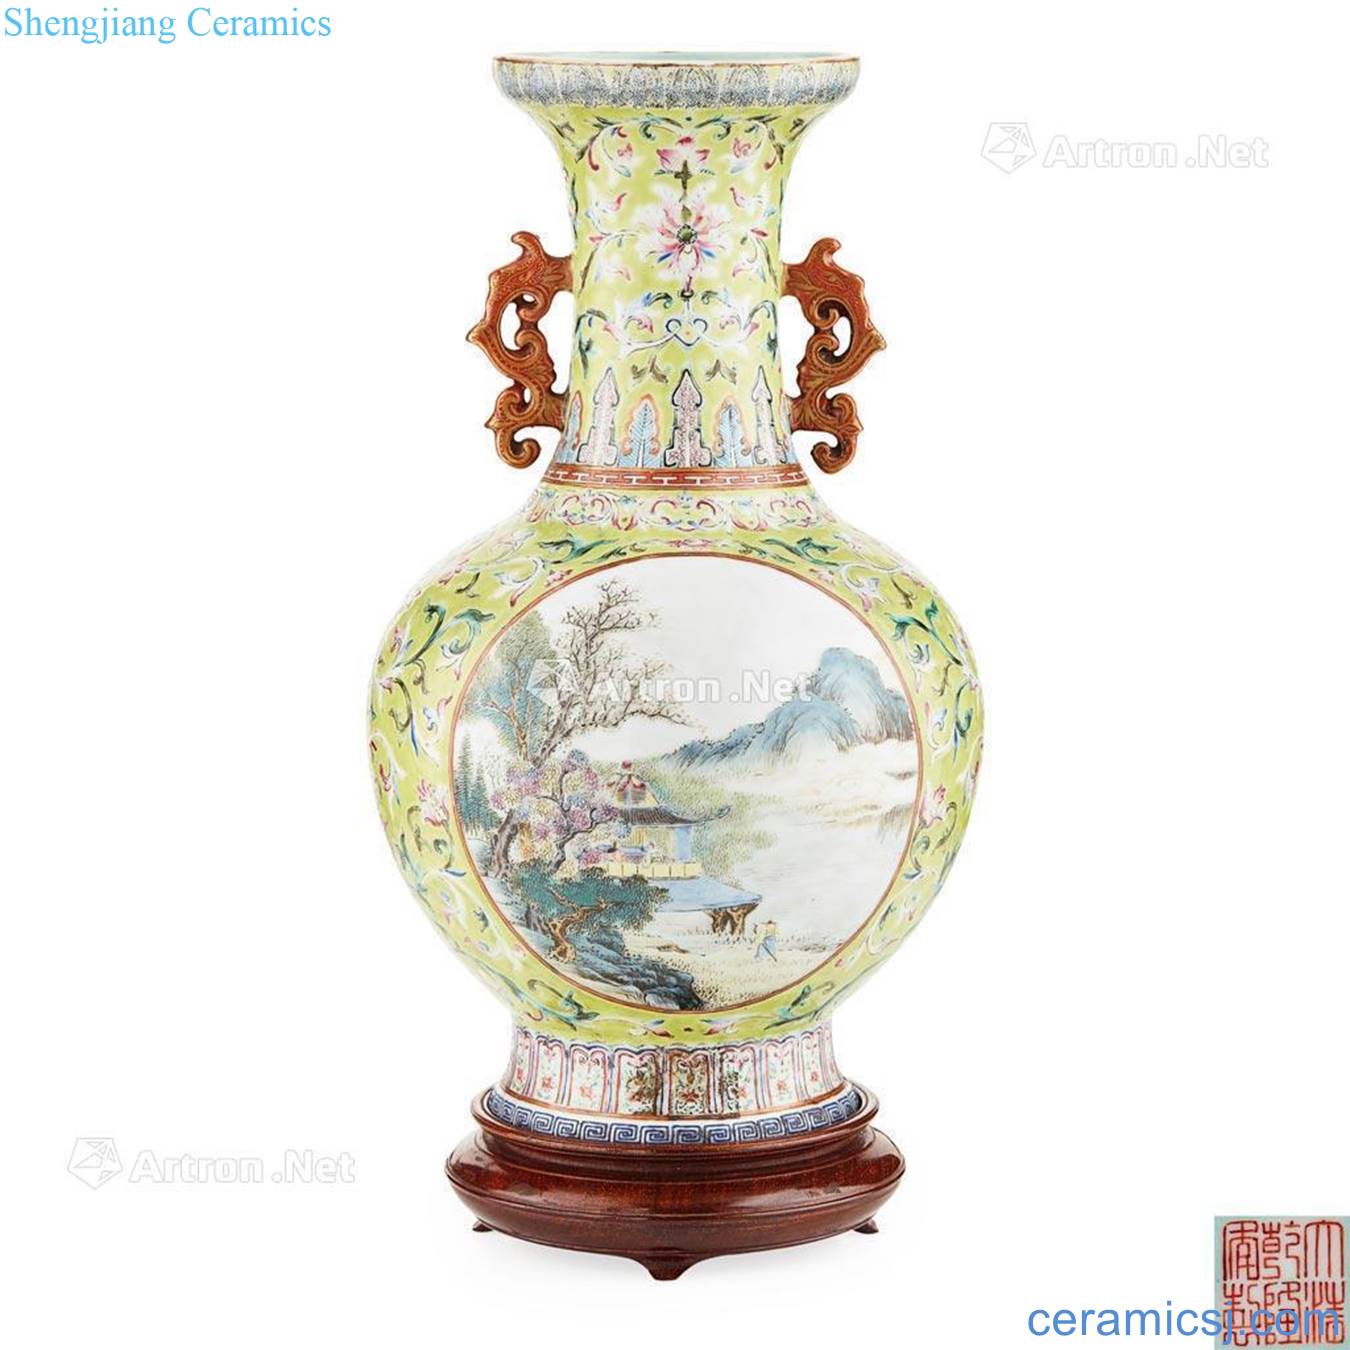 QIANLONG SEAL MARK, BUT 19 th CENTURY FAMILLE ROSE, the LIME - GREEN GROUND VASE